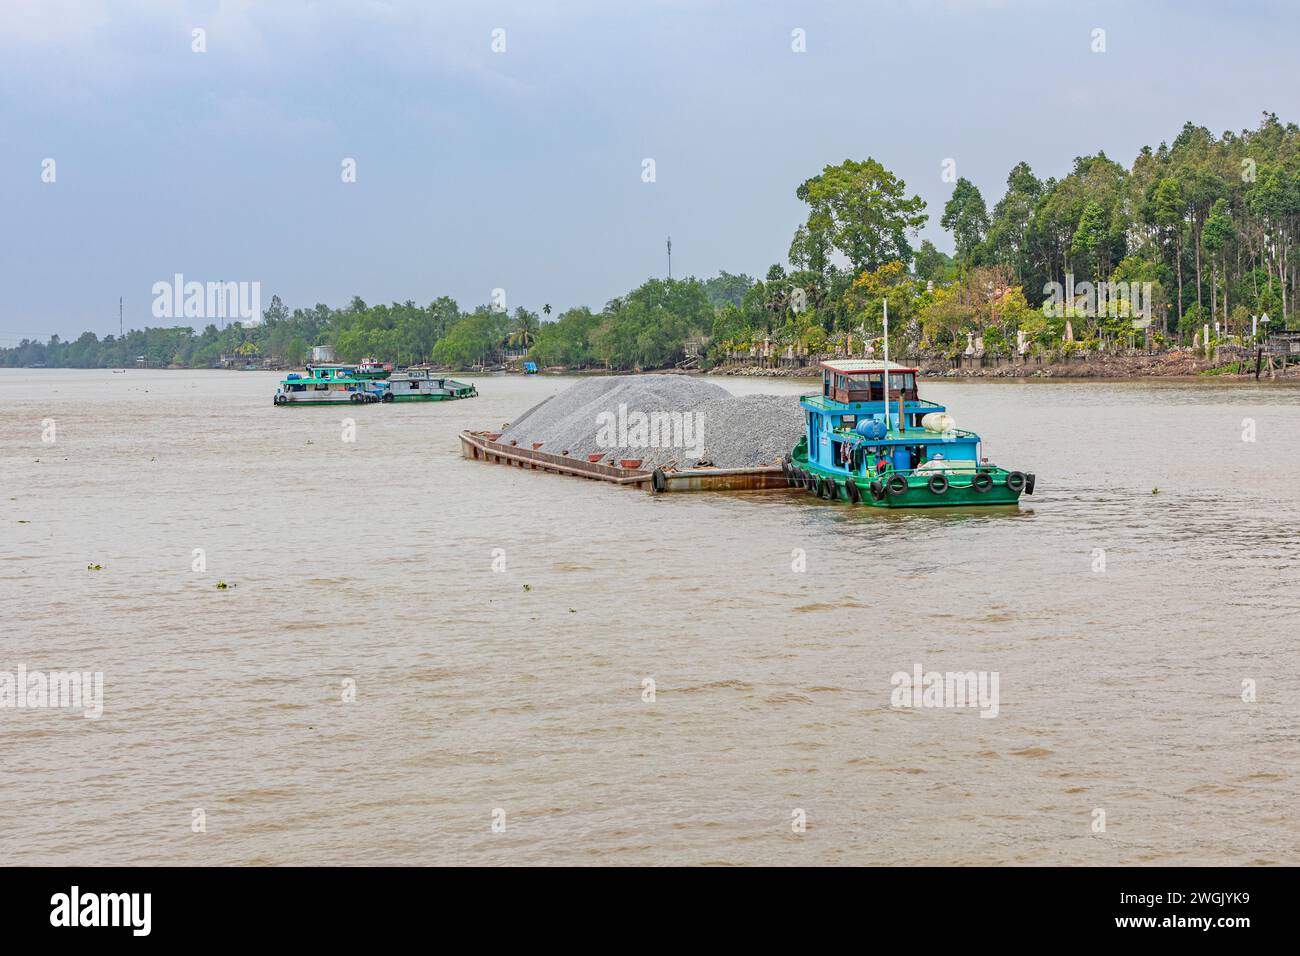 A heavily laden cargo boat and barge on the Mekong river delta, Vietnam. Stock Photo